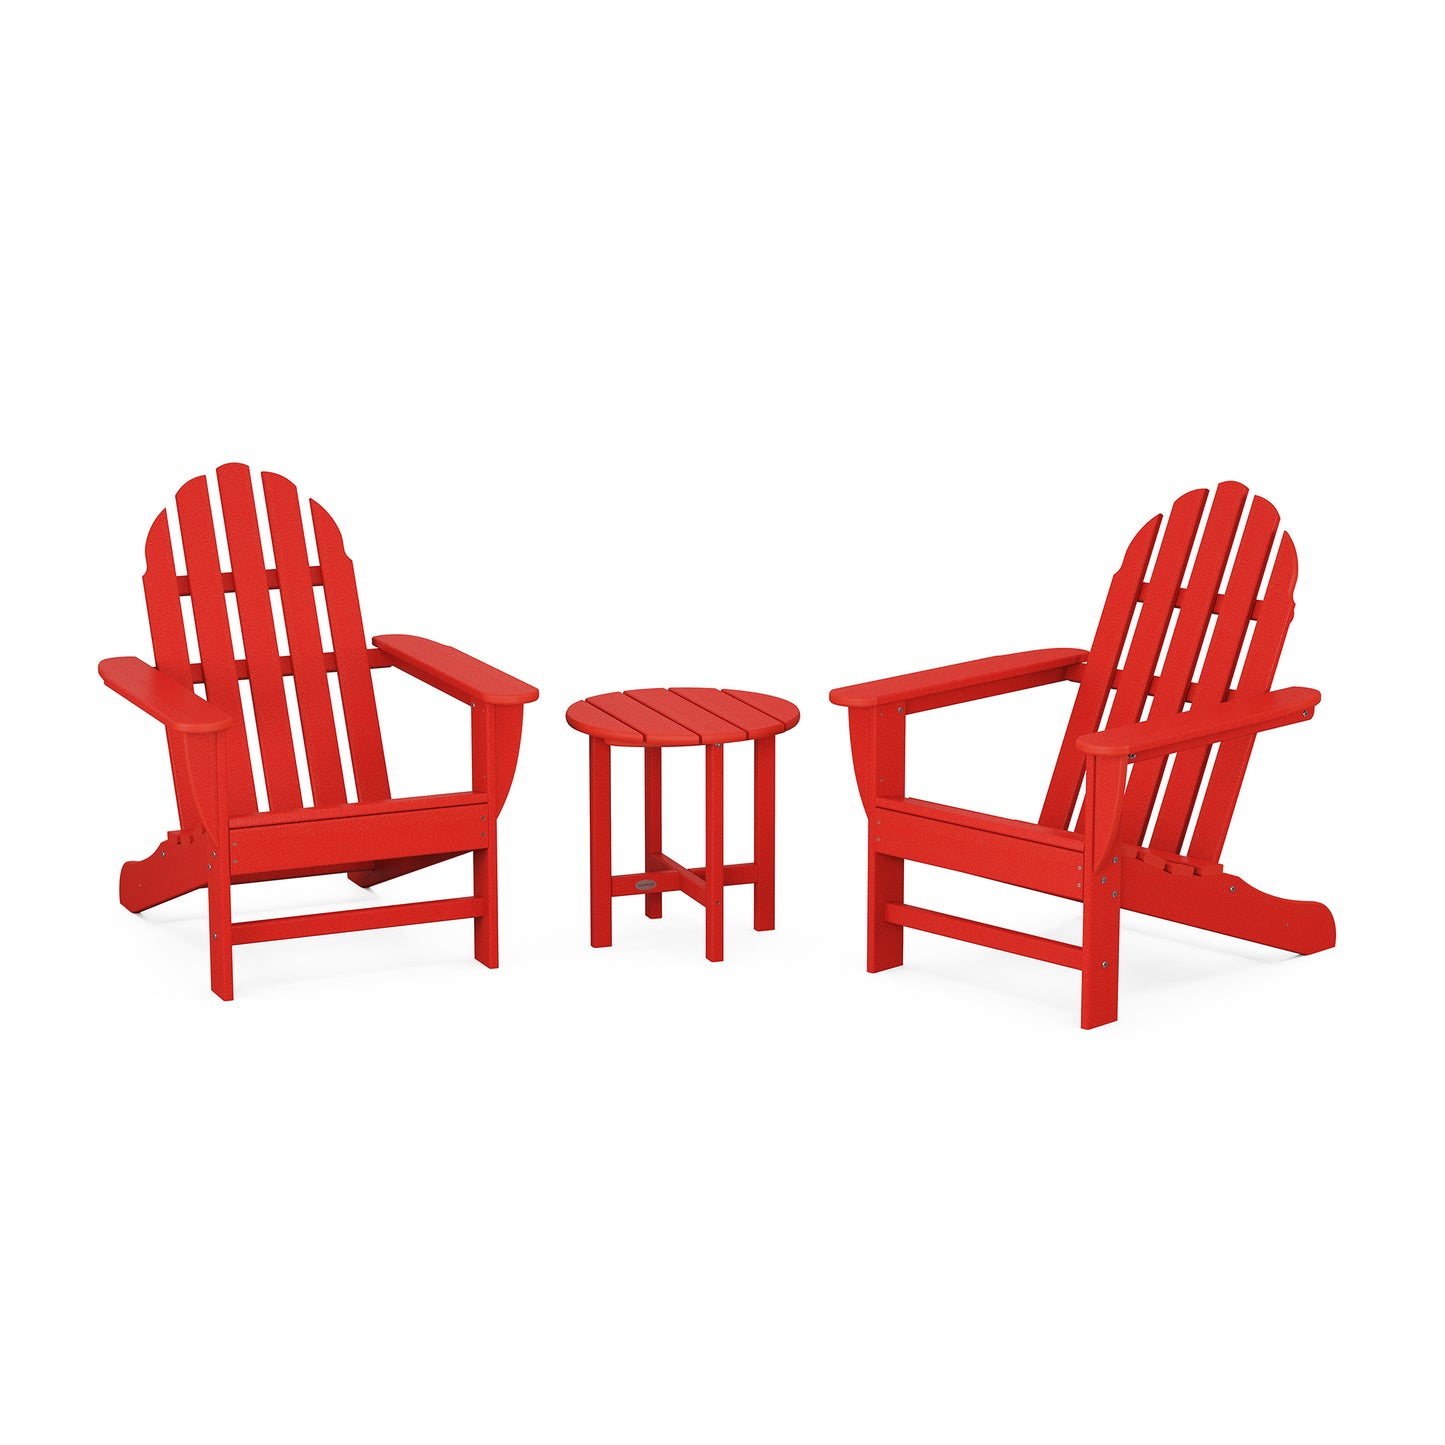 Two red POLYWOOD® Classic Adirondack 3-Piece Sets and a matching small round table isolated on a white background. The chairs feature a classic slatted design with wide armrests.